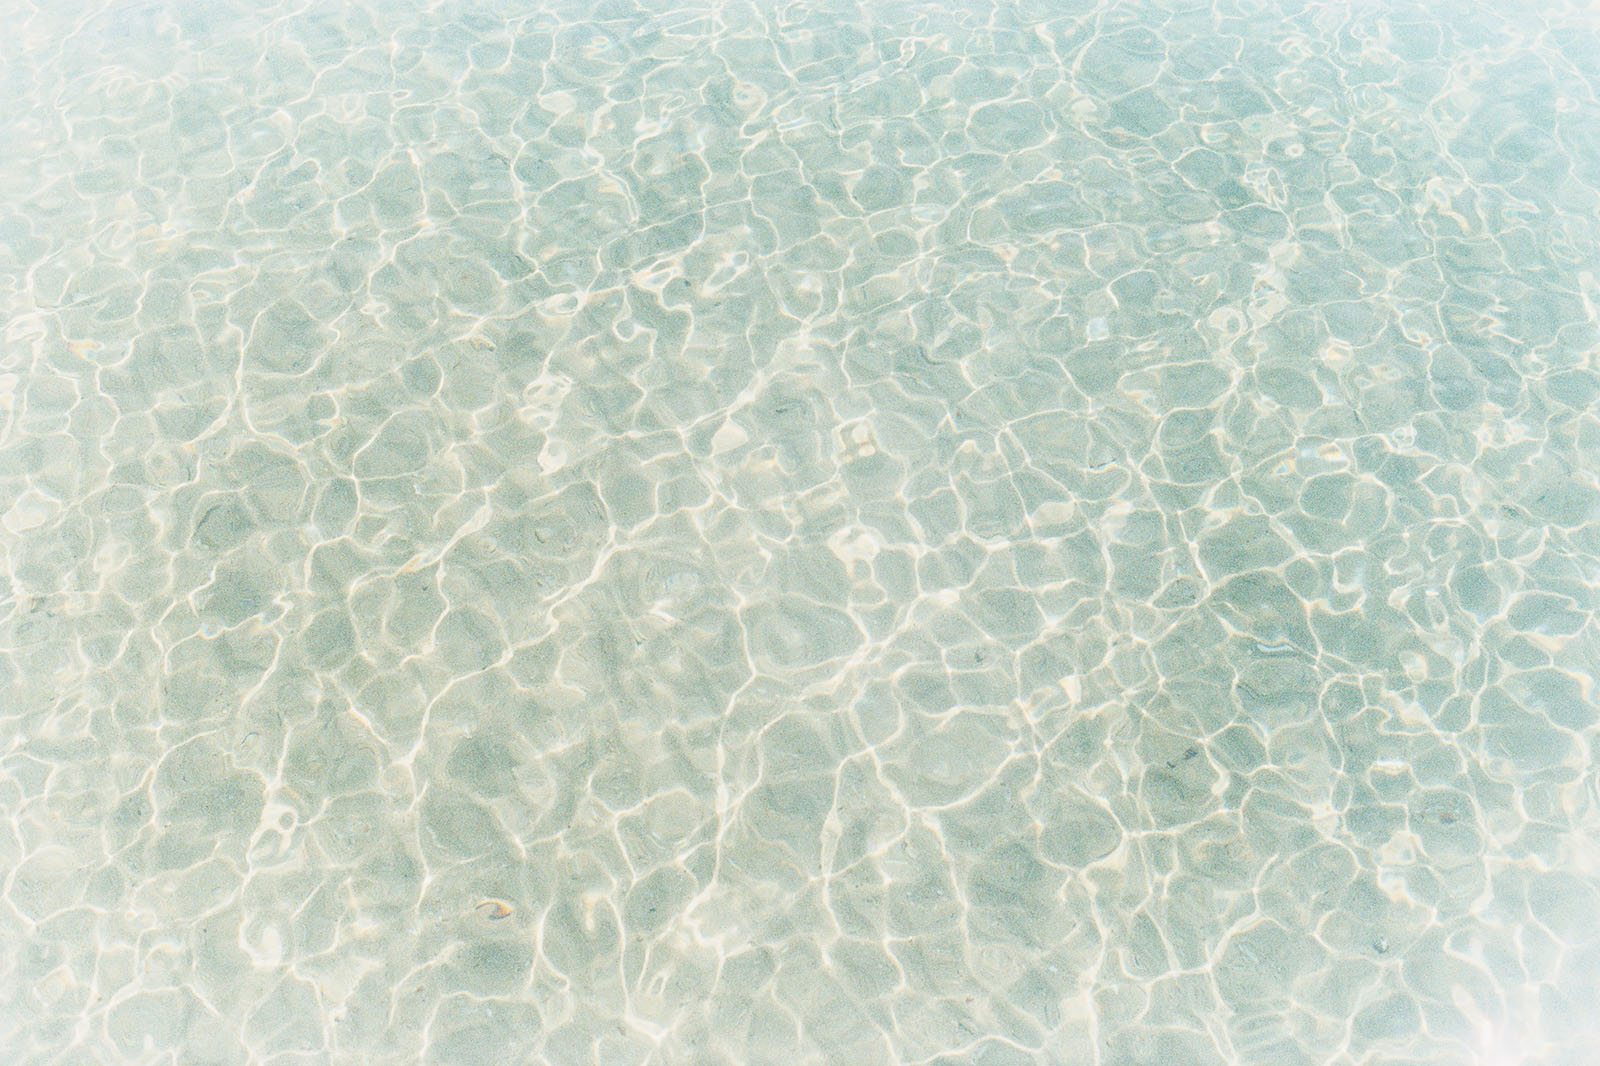 Crystal clear waters in Koh Mak | Thailand Travel Photos